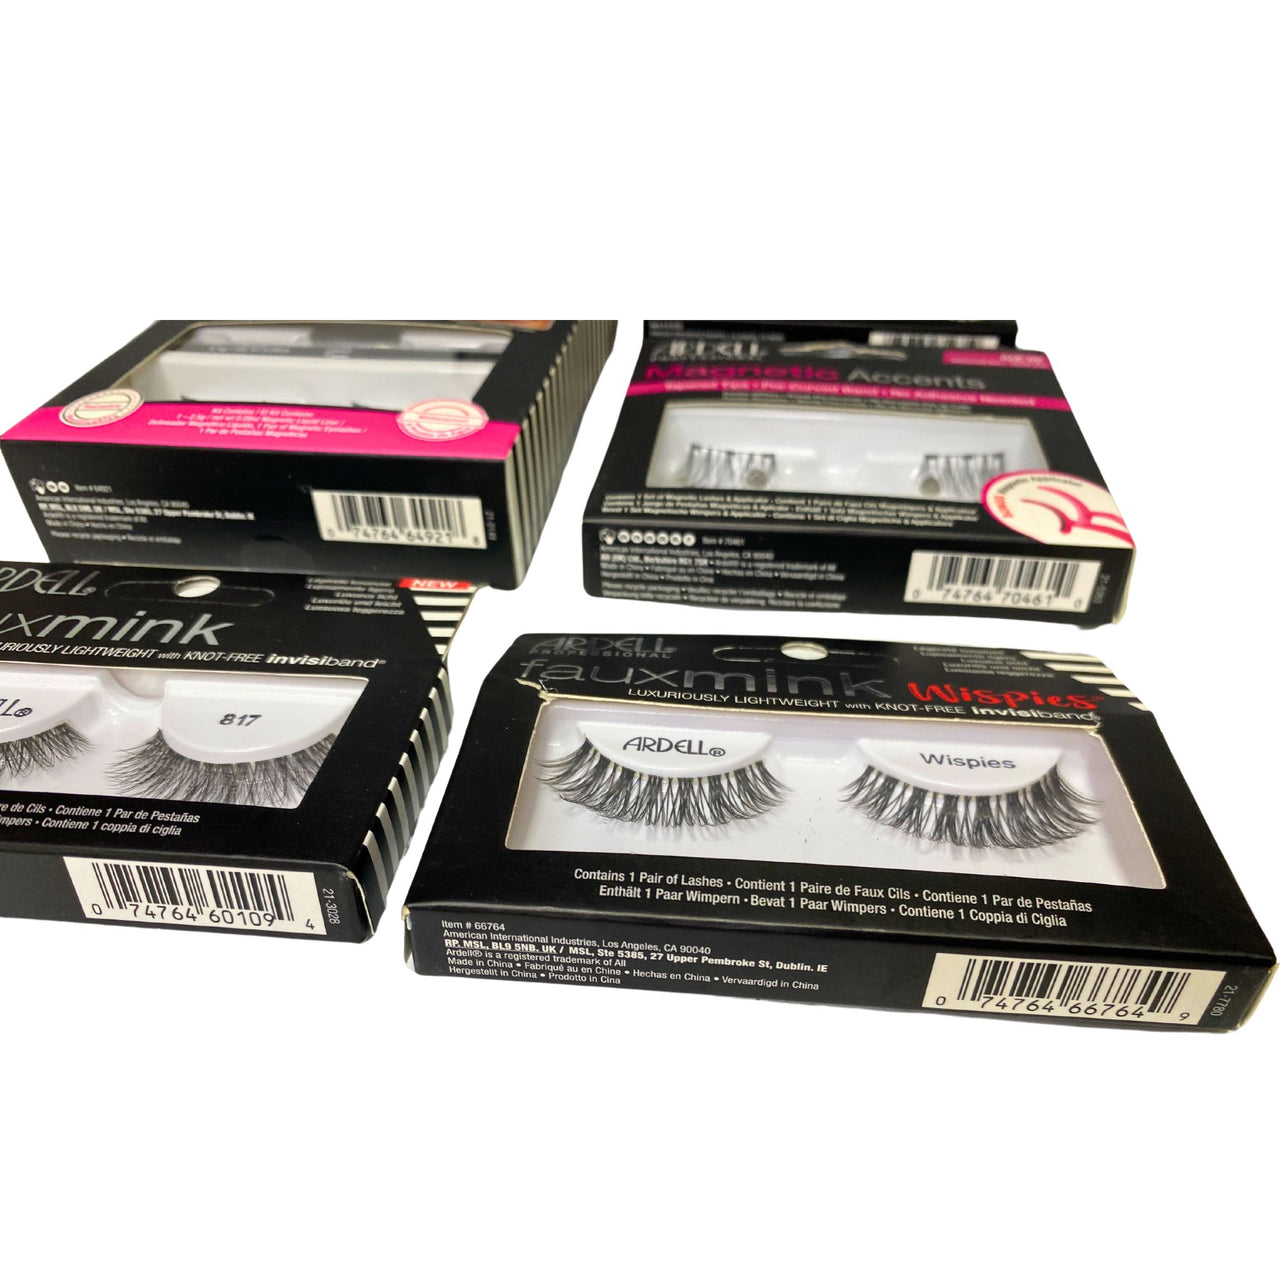 Ardell Lashes Mix includes Magnetic Lashes & Adhesive Lashes